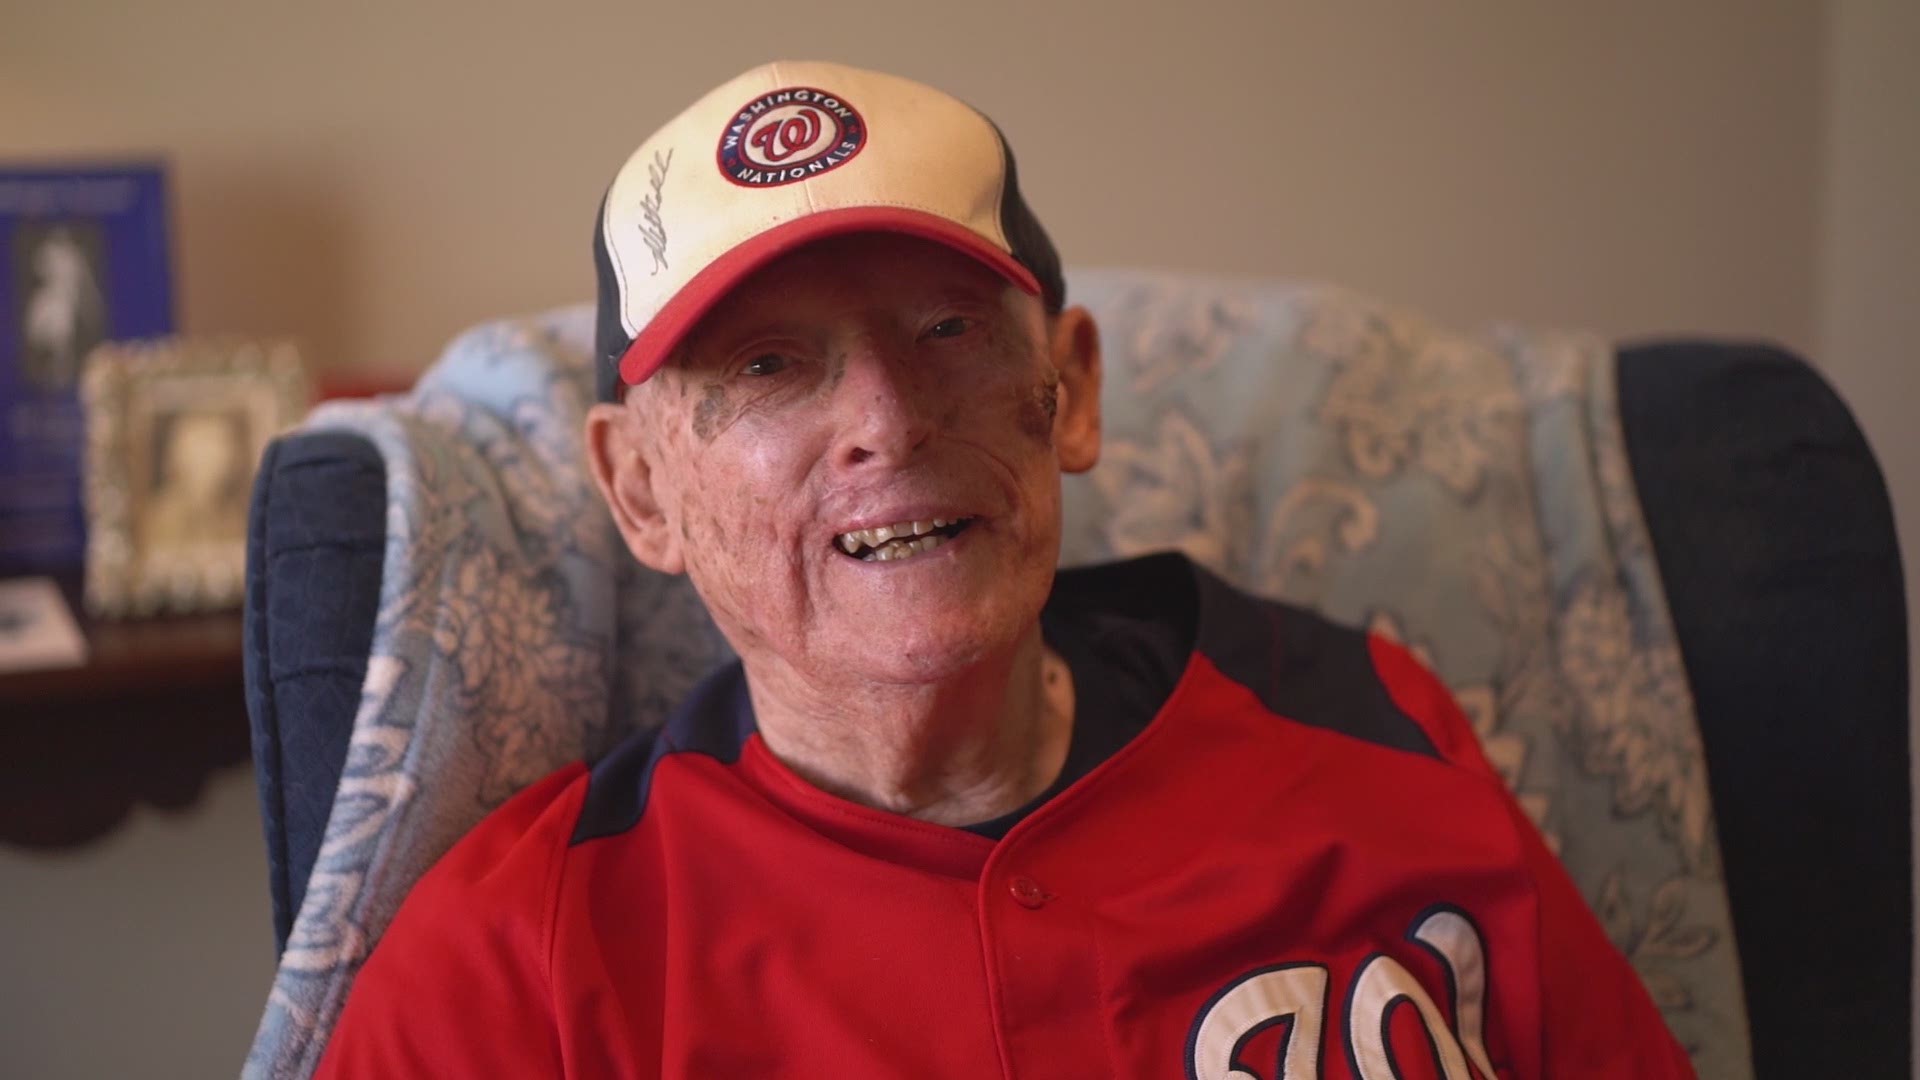 Willis grew up on V Street in Northwest D.C. listening to Washington Senators games on a transistor radio. Now his family thinks he should throw the first pitch.